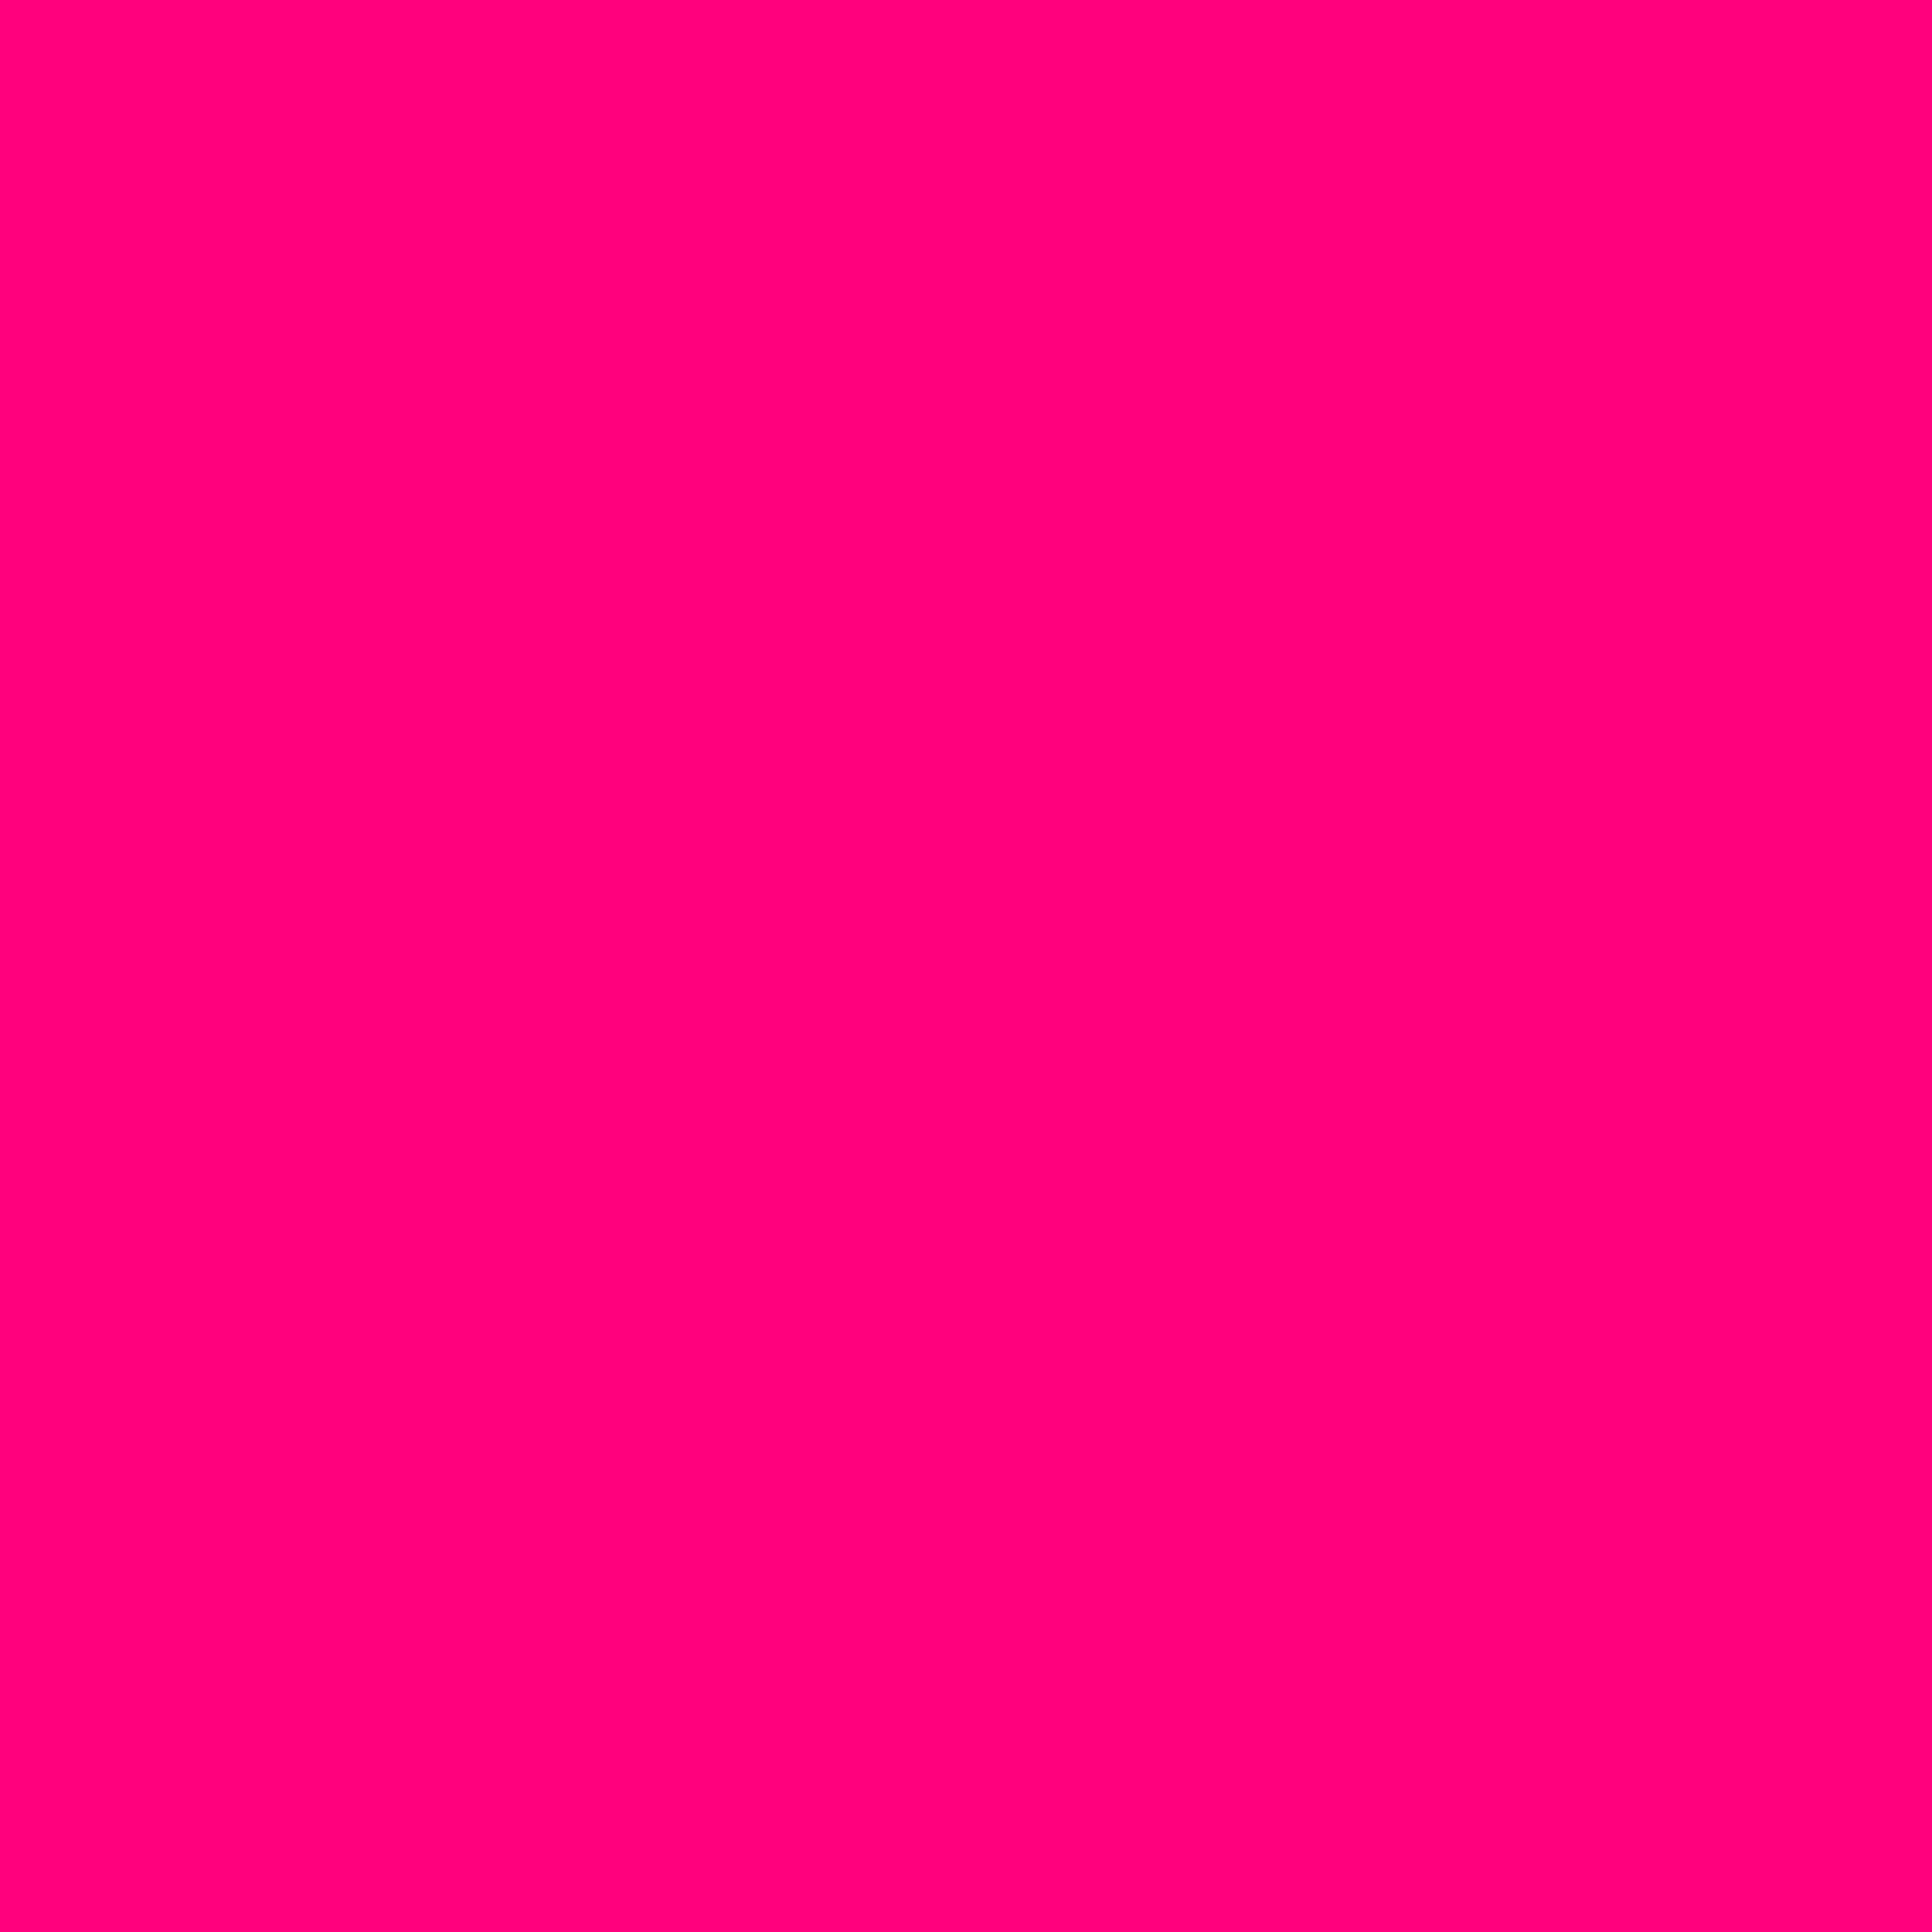 2048x2048 Bright Pink Solid Color Background